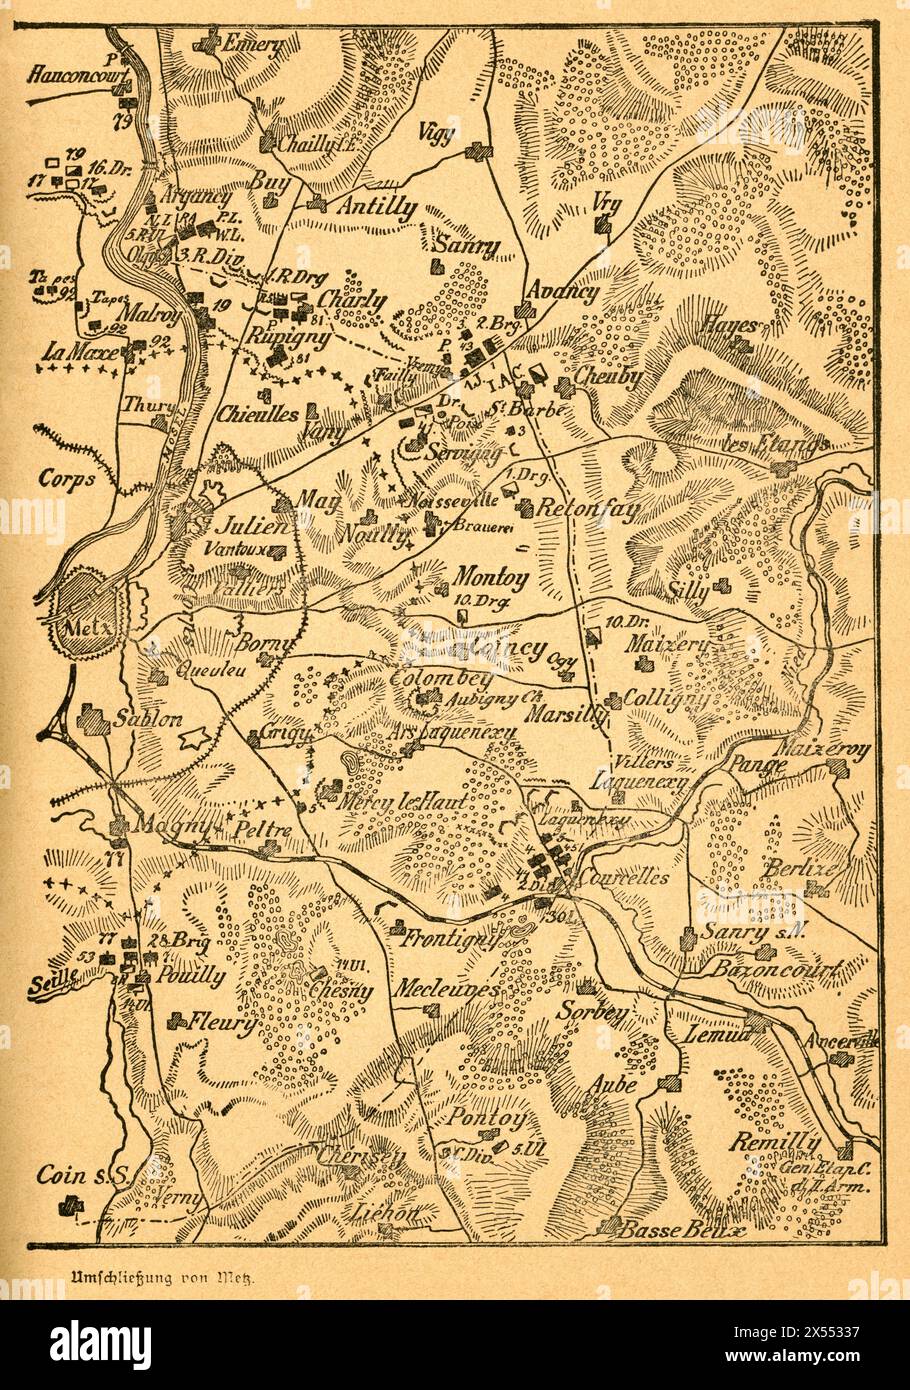 geography / travel, Germany, France, Metz, Franco-Prussian War, the closure on Metz, first part of the map, ARTIST'S COPYRIGHT HAS NOT TO BE CLEARED Stock Photo